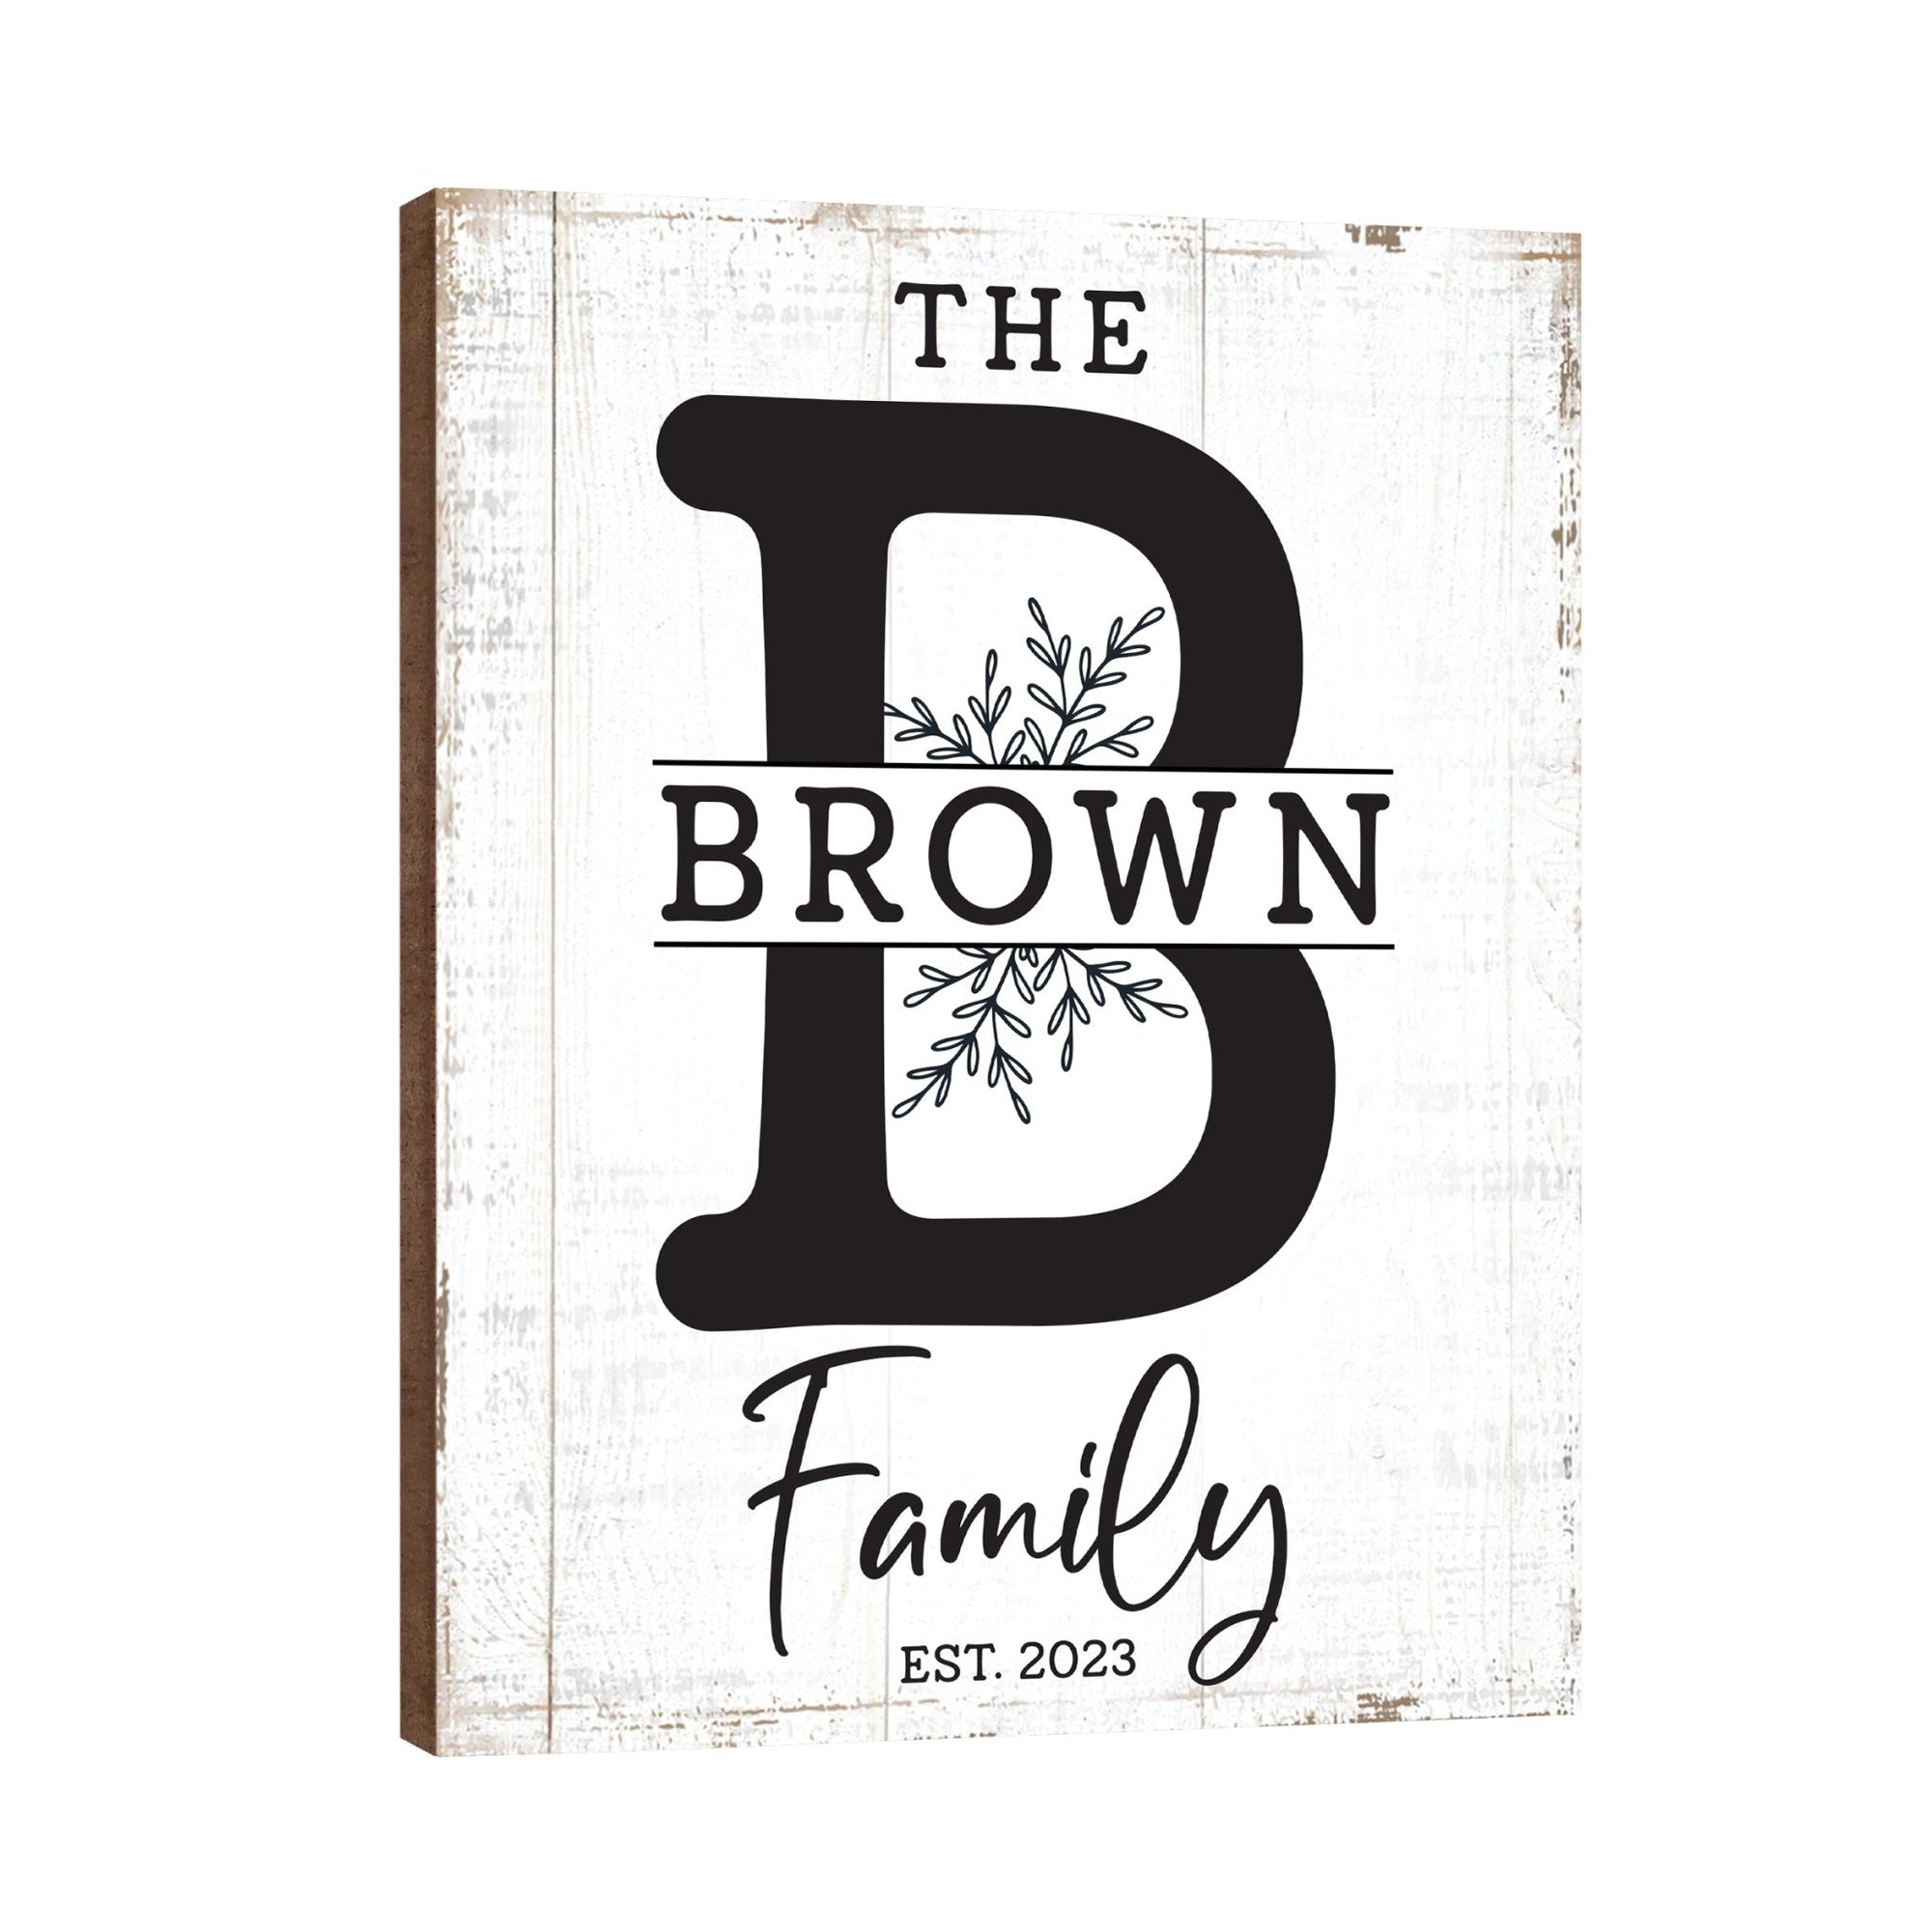 Personalized Family Wall Hanging Plaque for Home Décor - The Brown Family - LifeSong Milestones